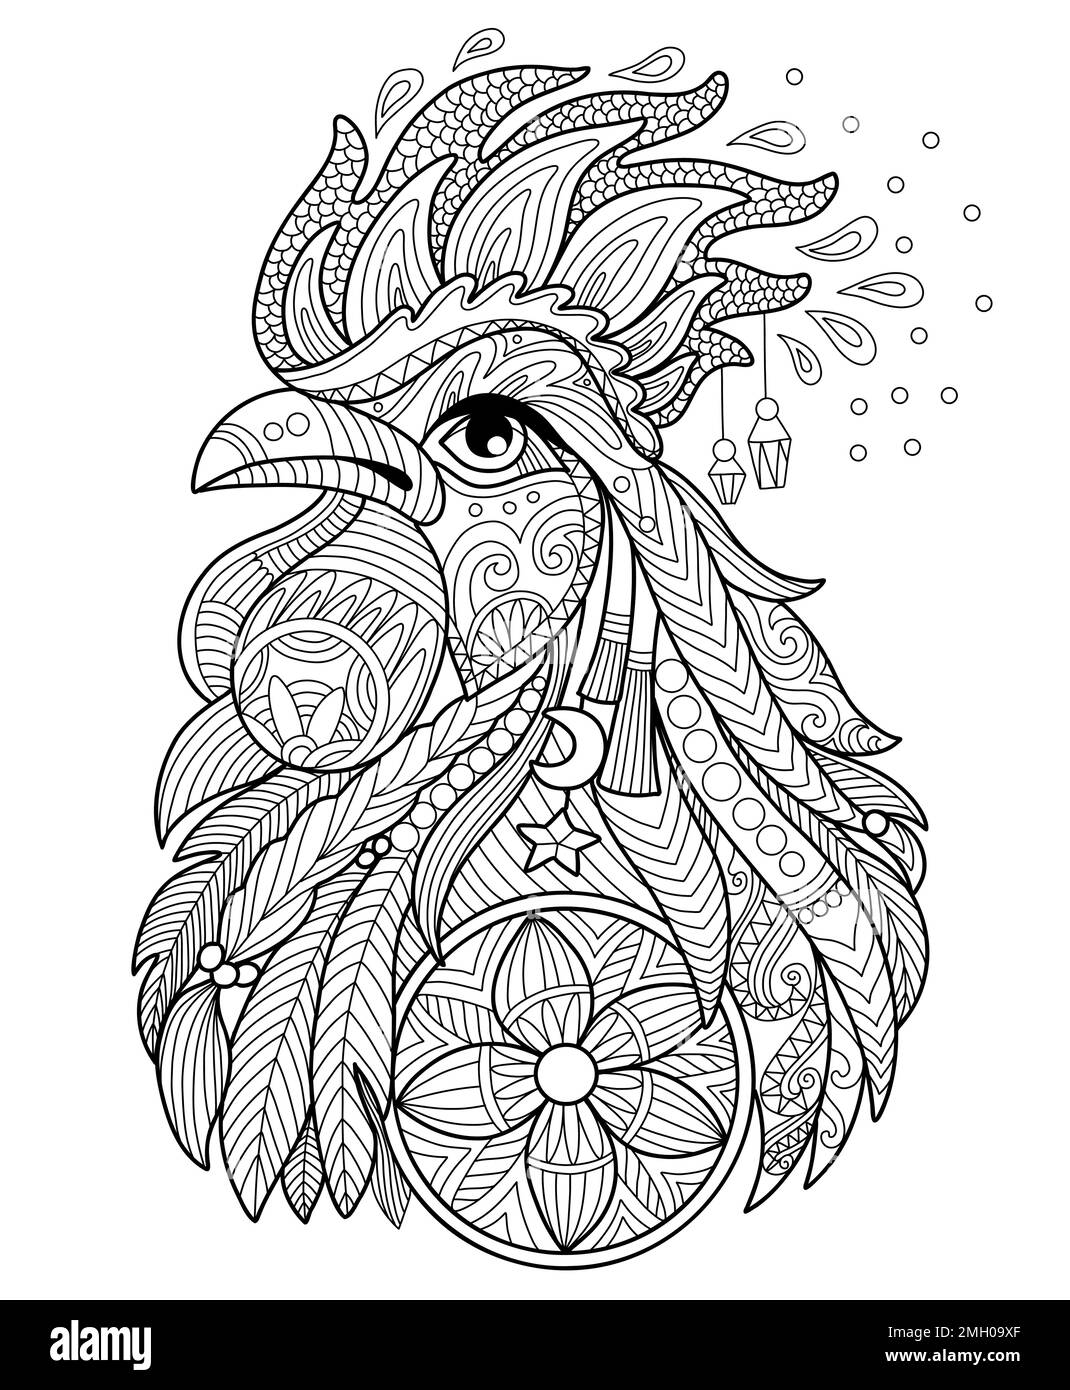 Rooster drawing Black and White Stock Photos & Images - Alamy